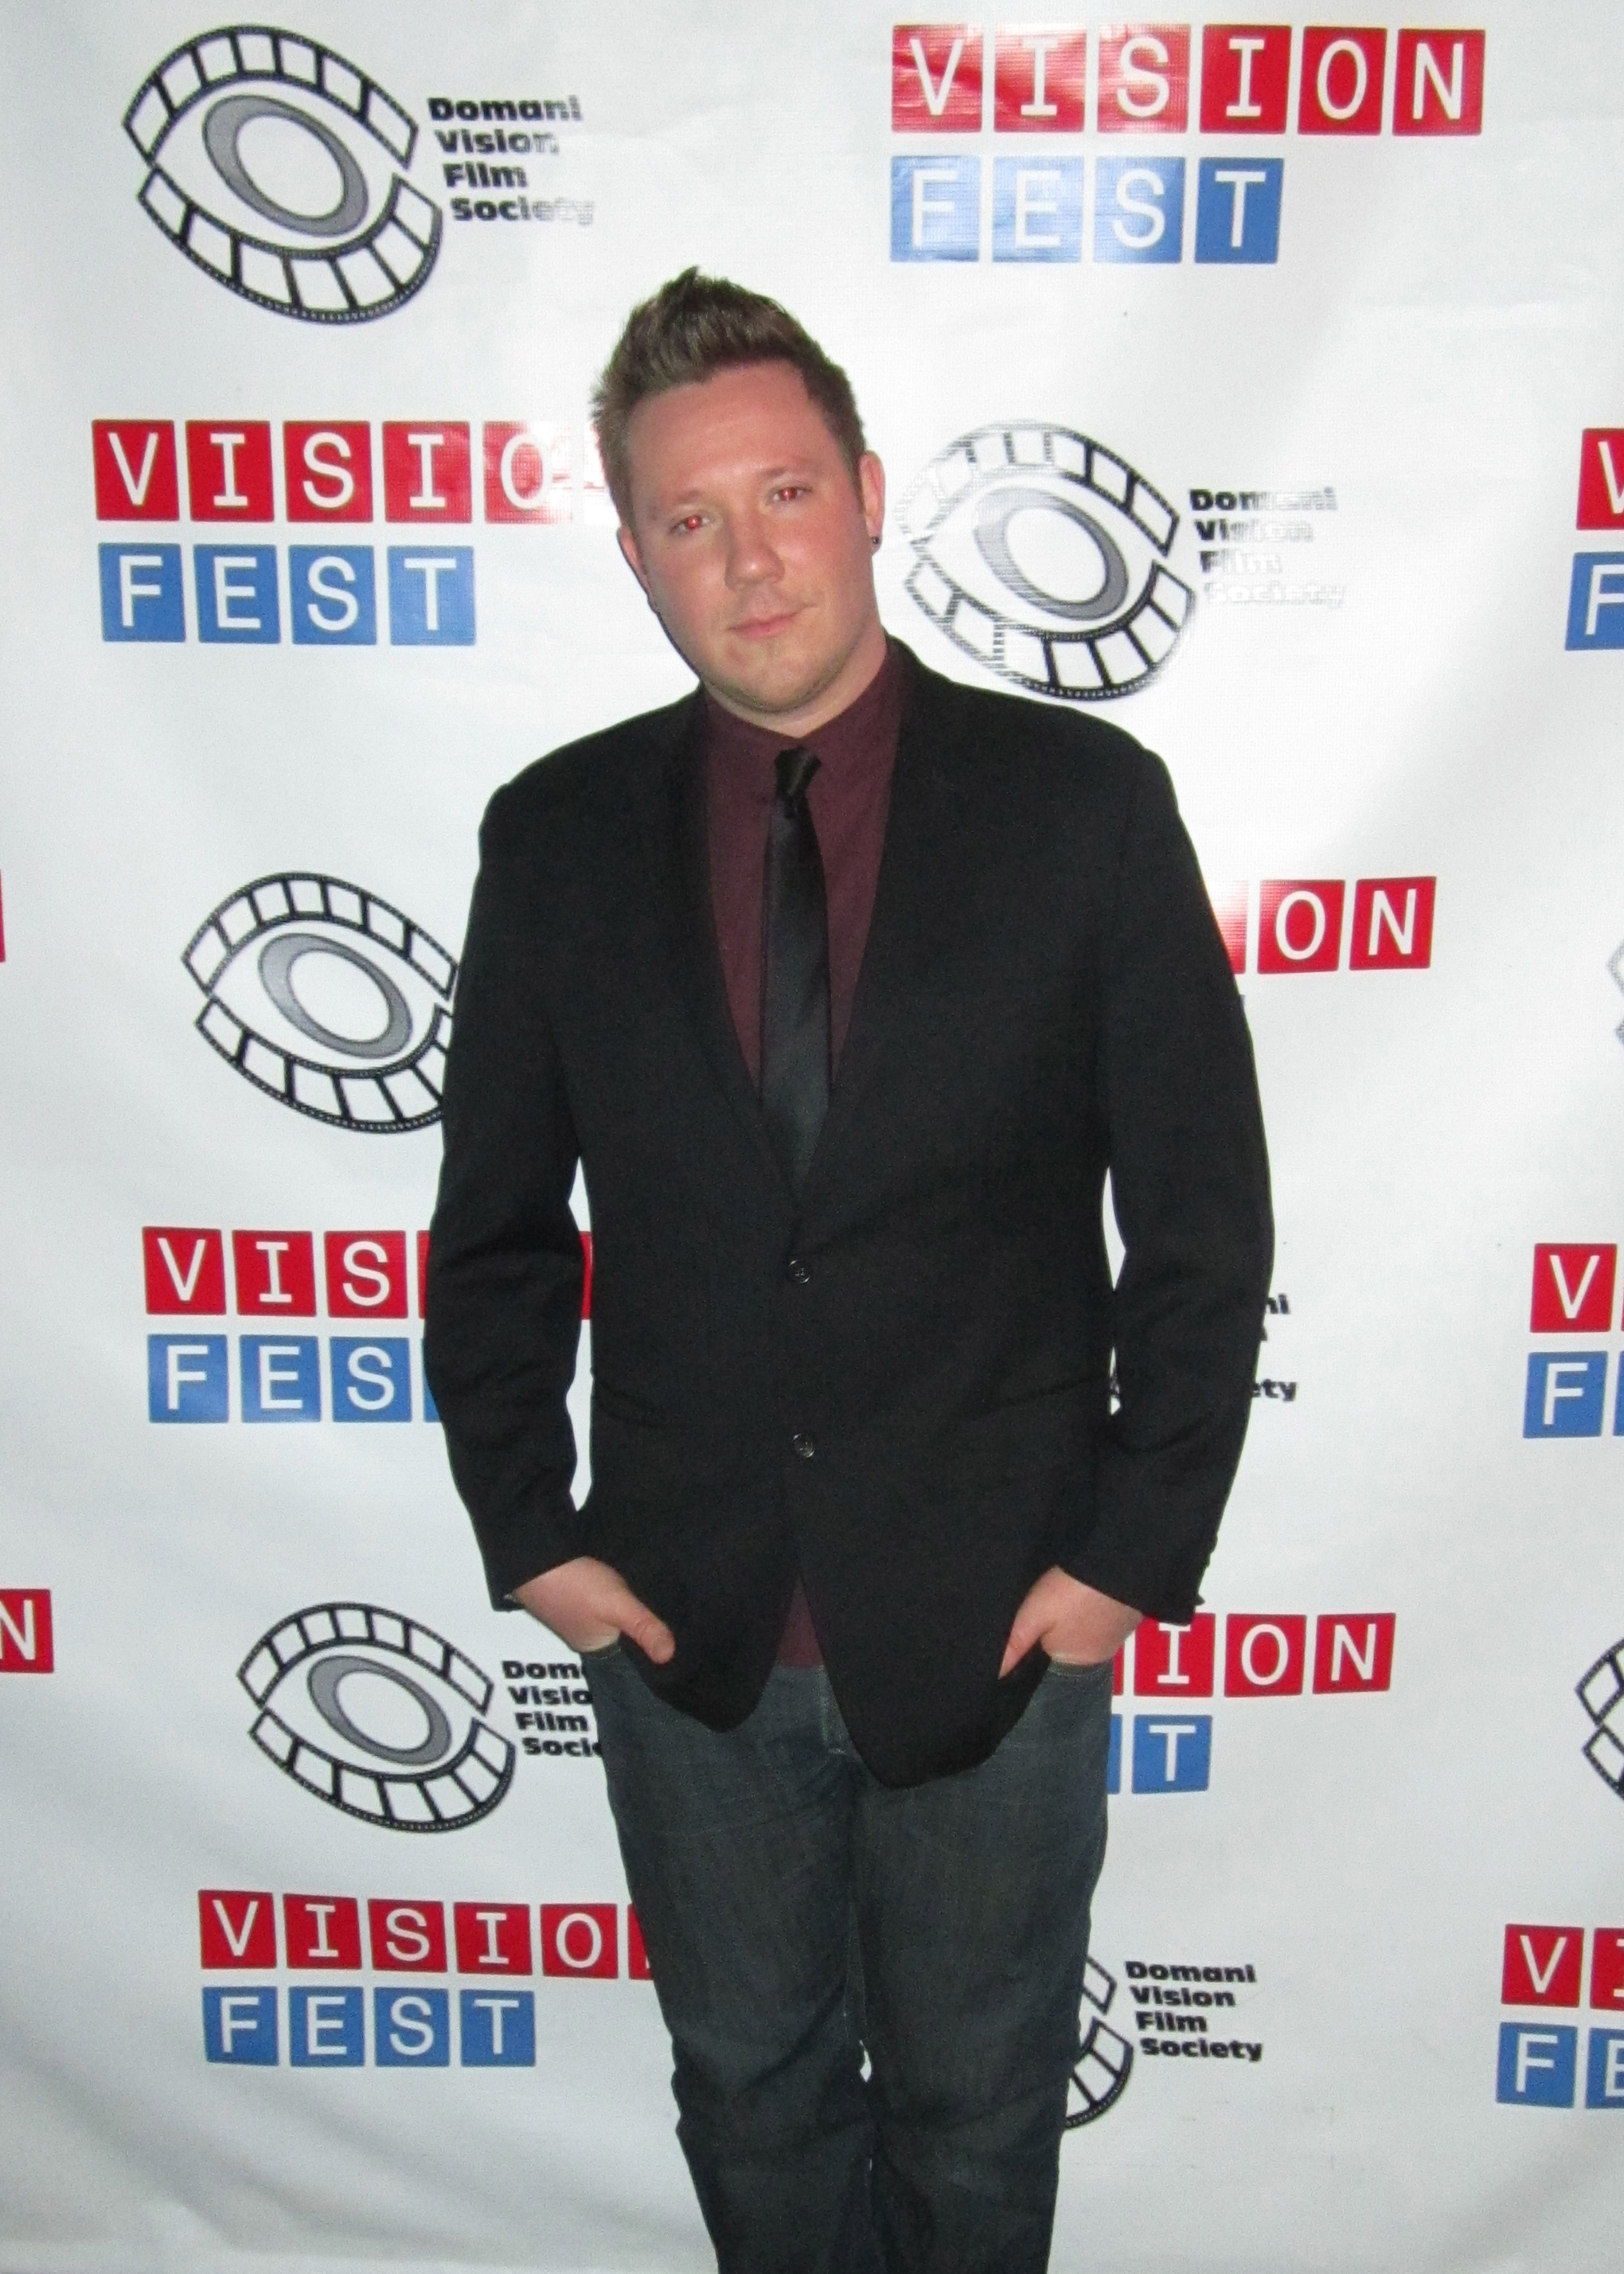 Director Brendan Gabriel Murphy on the red carpet at Visionfest NYC.